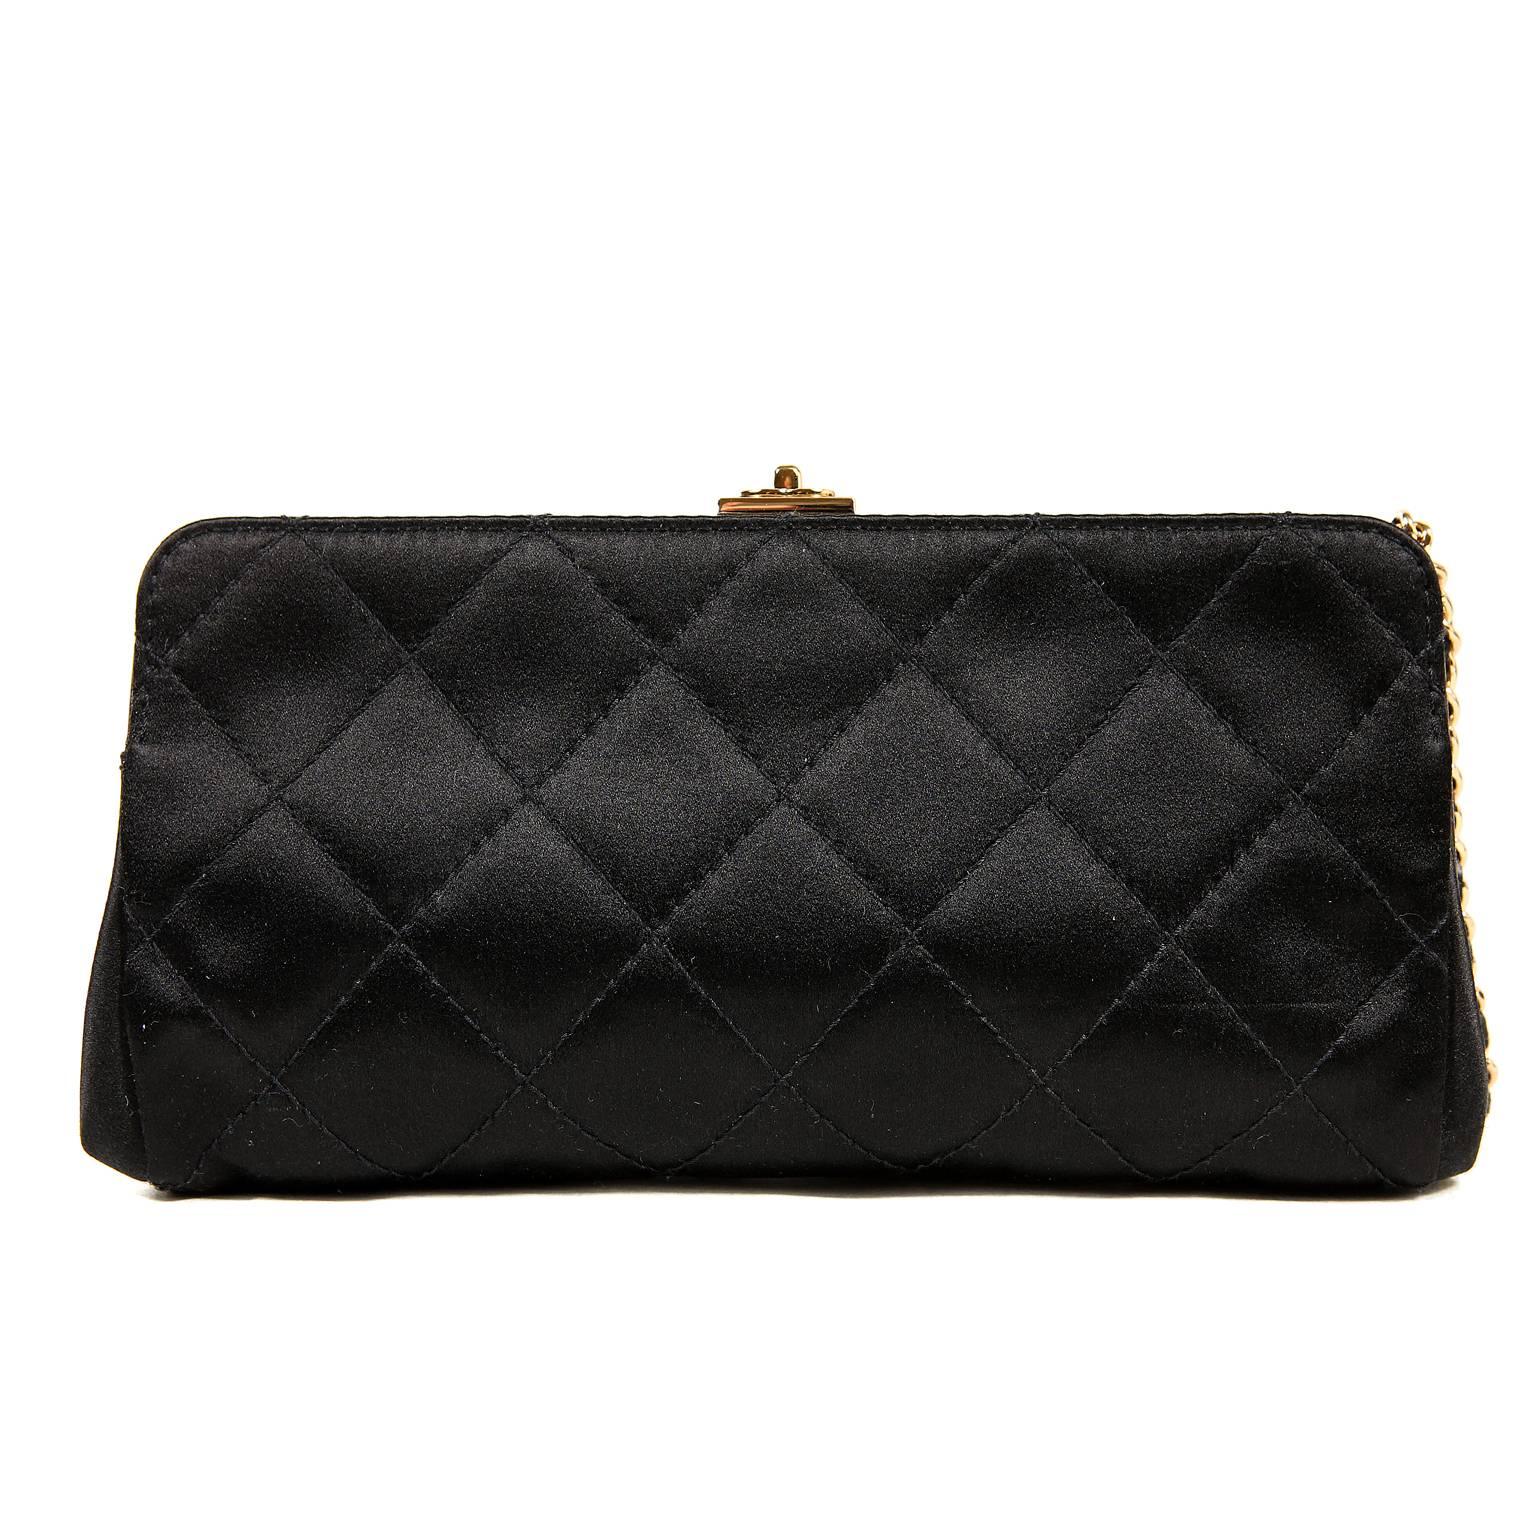 Chanel Black Satin Quilted Clutch- MINT
Perfectly sized, this ultimate classic is a brilliant addition to any wardrobe. 
Black satin framed clutch is quilted in signature Chanel diamond pattern. Black leather trims the top with a gold tone